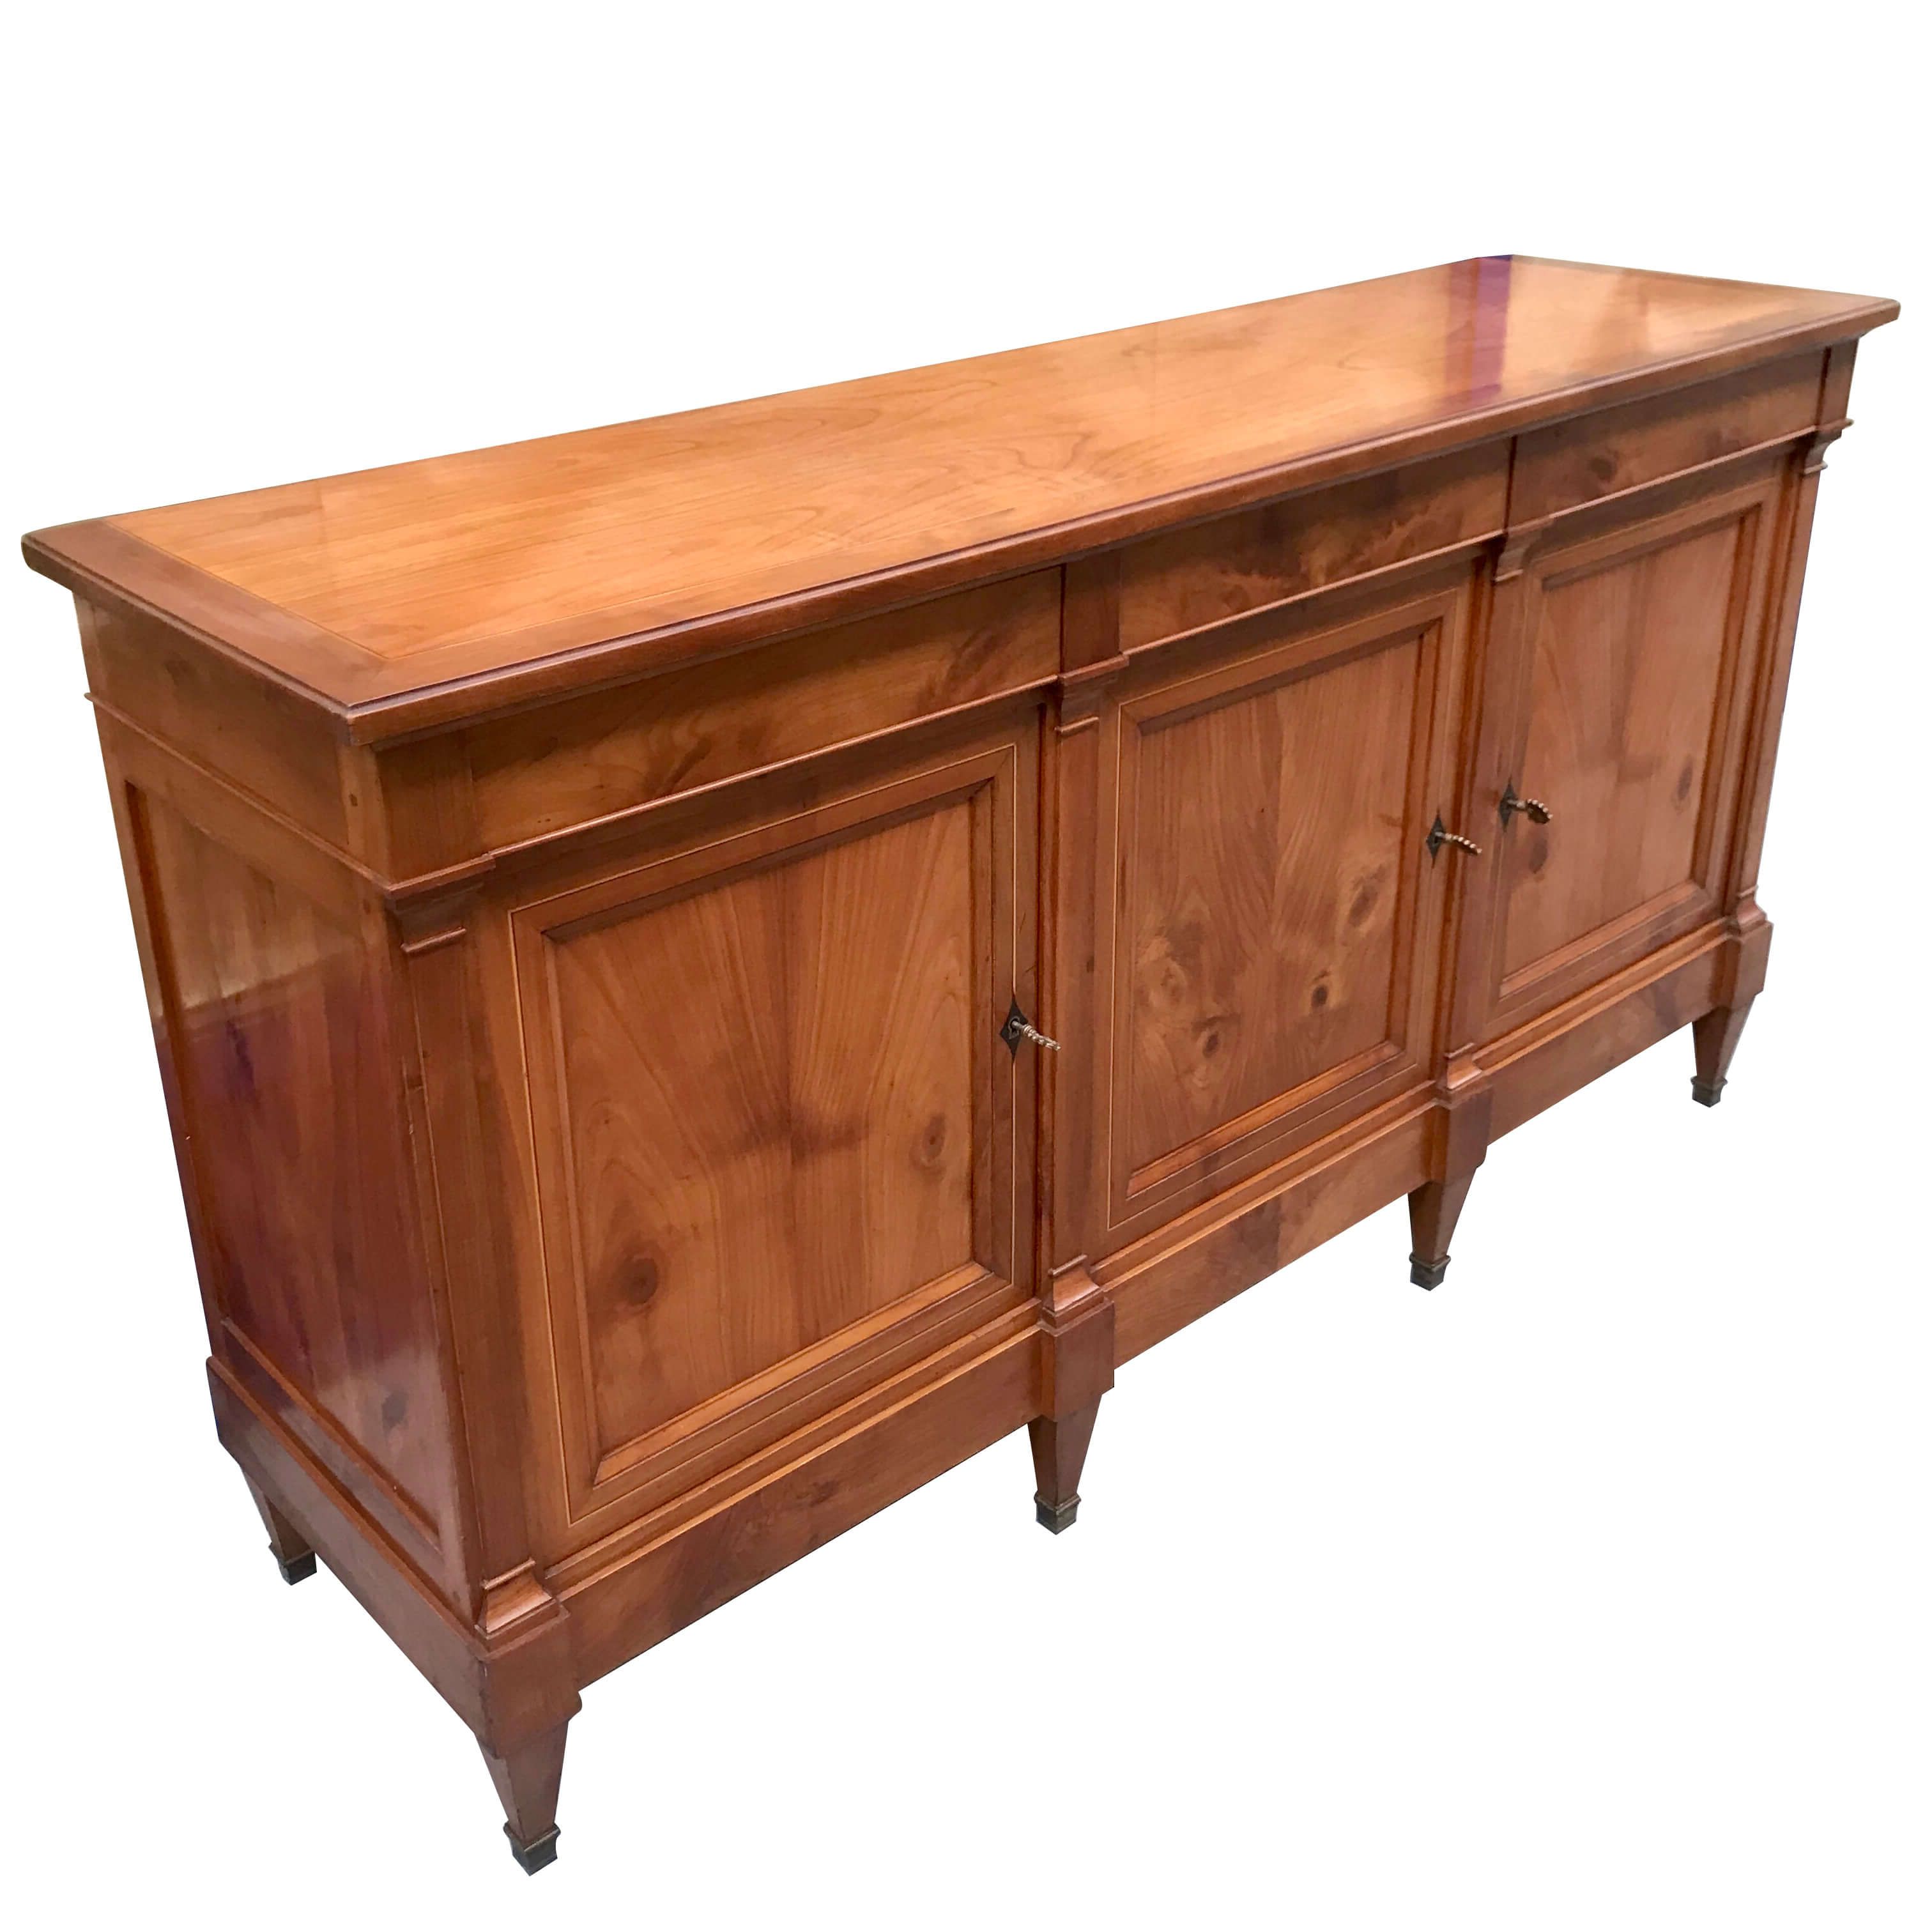 Trendy Directoire Style Sideboard With 3 Doors And 3 Drawers In Cherry Wood With  Inlaid Fillets And Bronze Brackets, 19th Century (Photo 10 of 10)